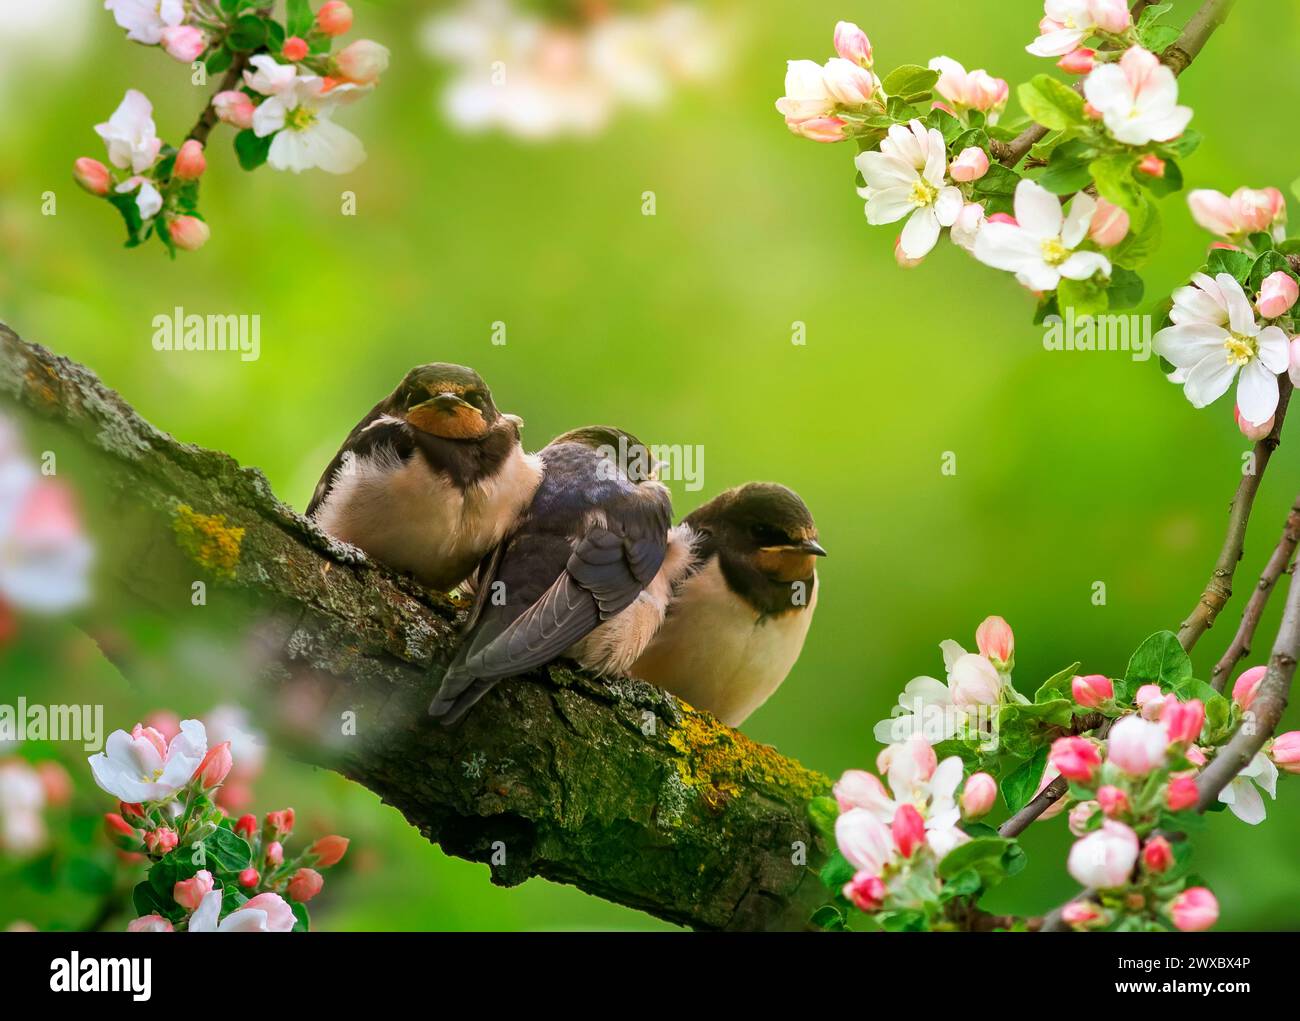 three little swallow chicks are sitting on an apple tree with pink flowers in the spring May garden Stock Photo